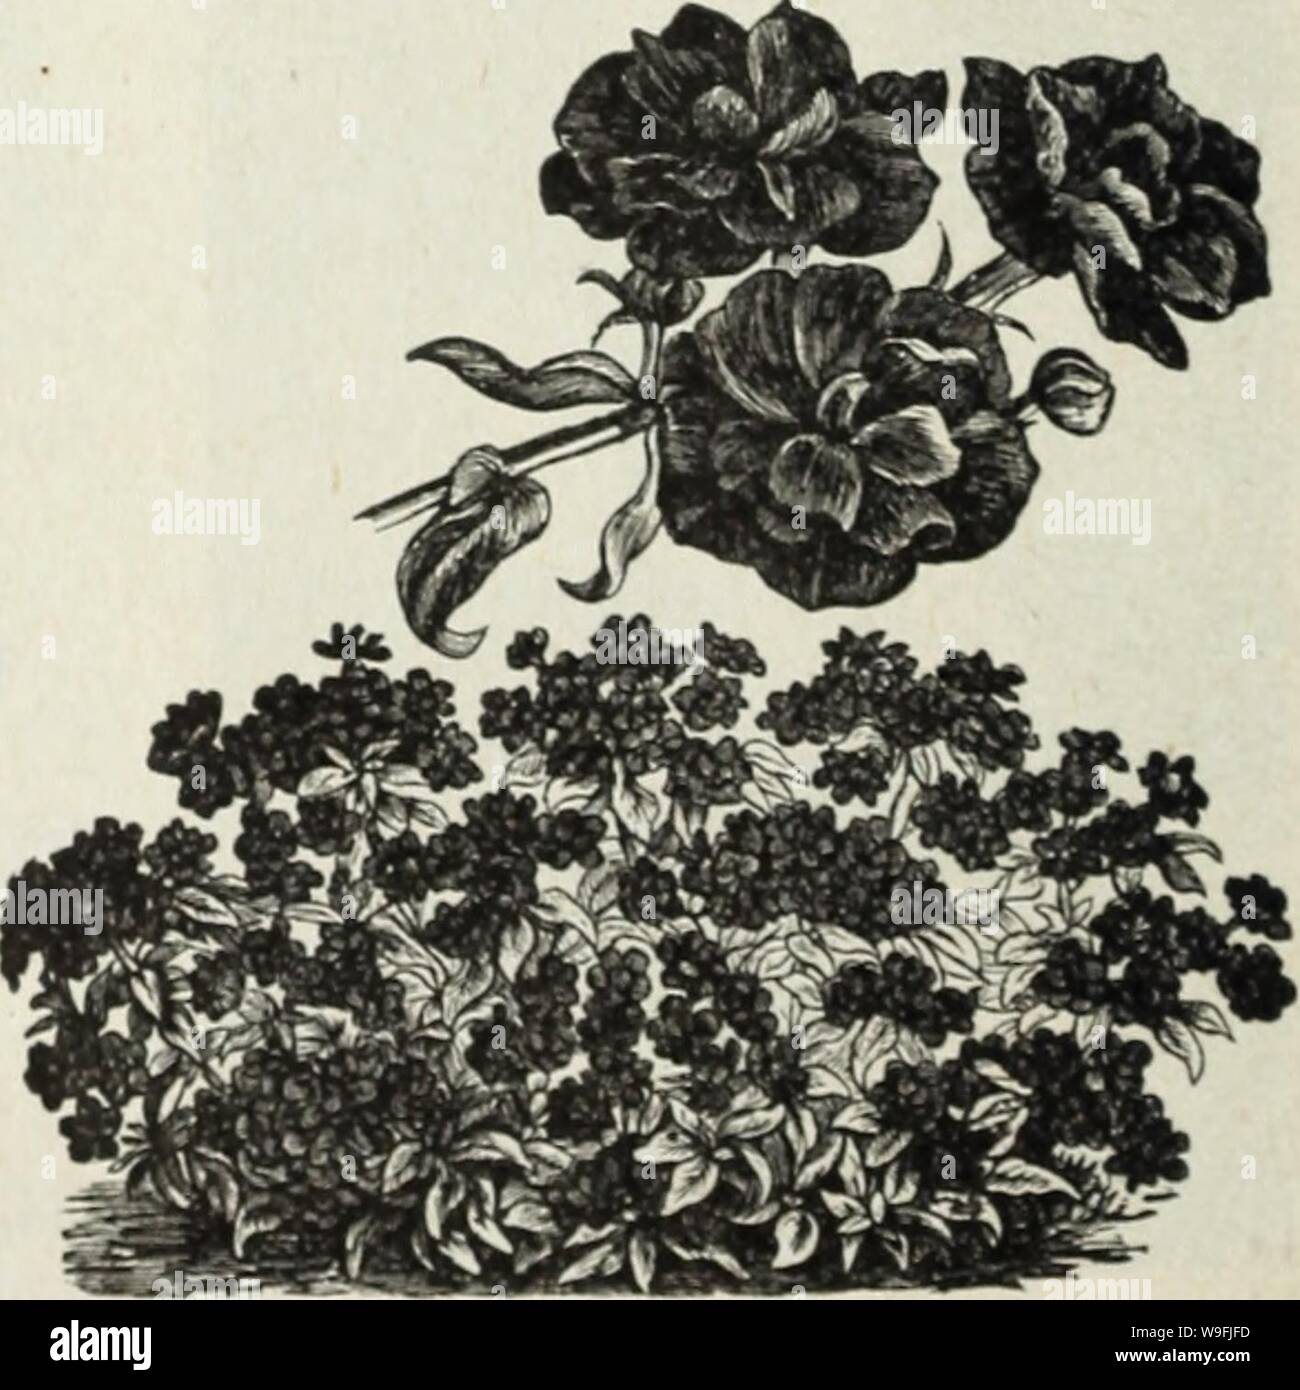 Archive image from page 47 of Currie's farm and garden annual. Currie's farm and garden annual : spring 1930  curriesfarmgarde19curr Year: 1930 ( Hardy Perennial Phlox. SEMI-DOUBLE PHLOX Pkt. Especially desirable for cut flowers lasting better than the single sorts. To produce the best results they should be grown in a light soil. Finest mixed colors.  oz., 50c $0.10 LARGE-FLOWERING DWARF PHLOX A type combining the size of the individual flower and head of the finest Grandifloras, but of dwarf, compact growth, a perfect combination; and while they do not come in the large variety of colors fou Stock Photo